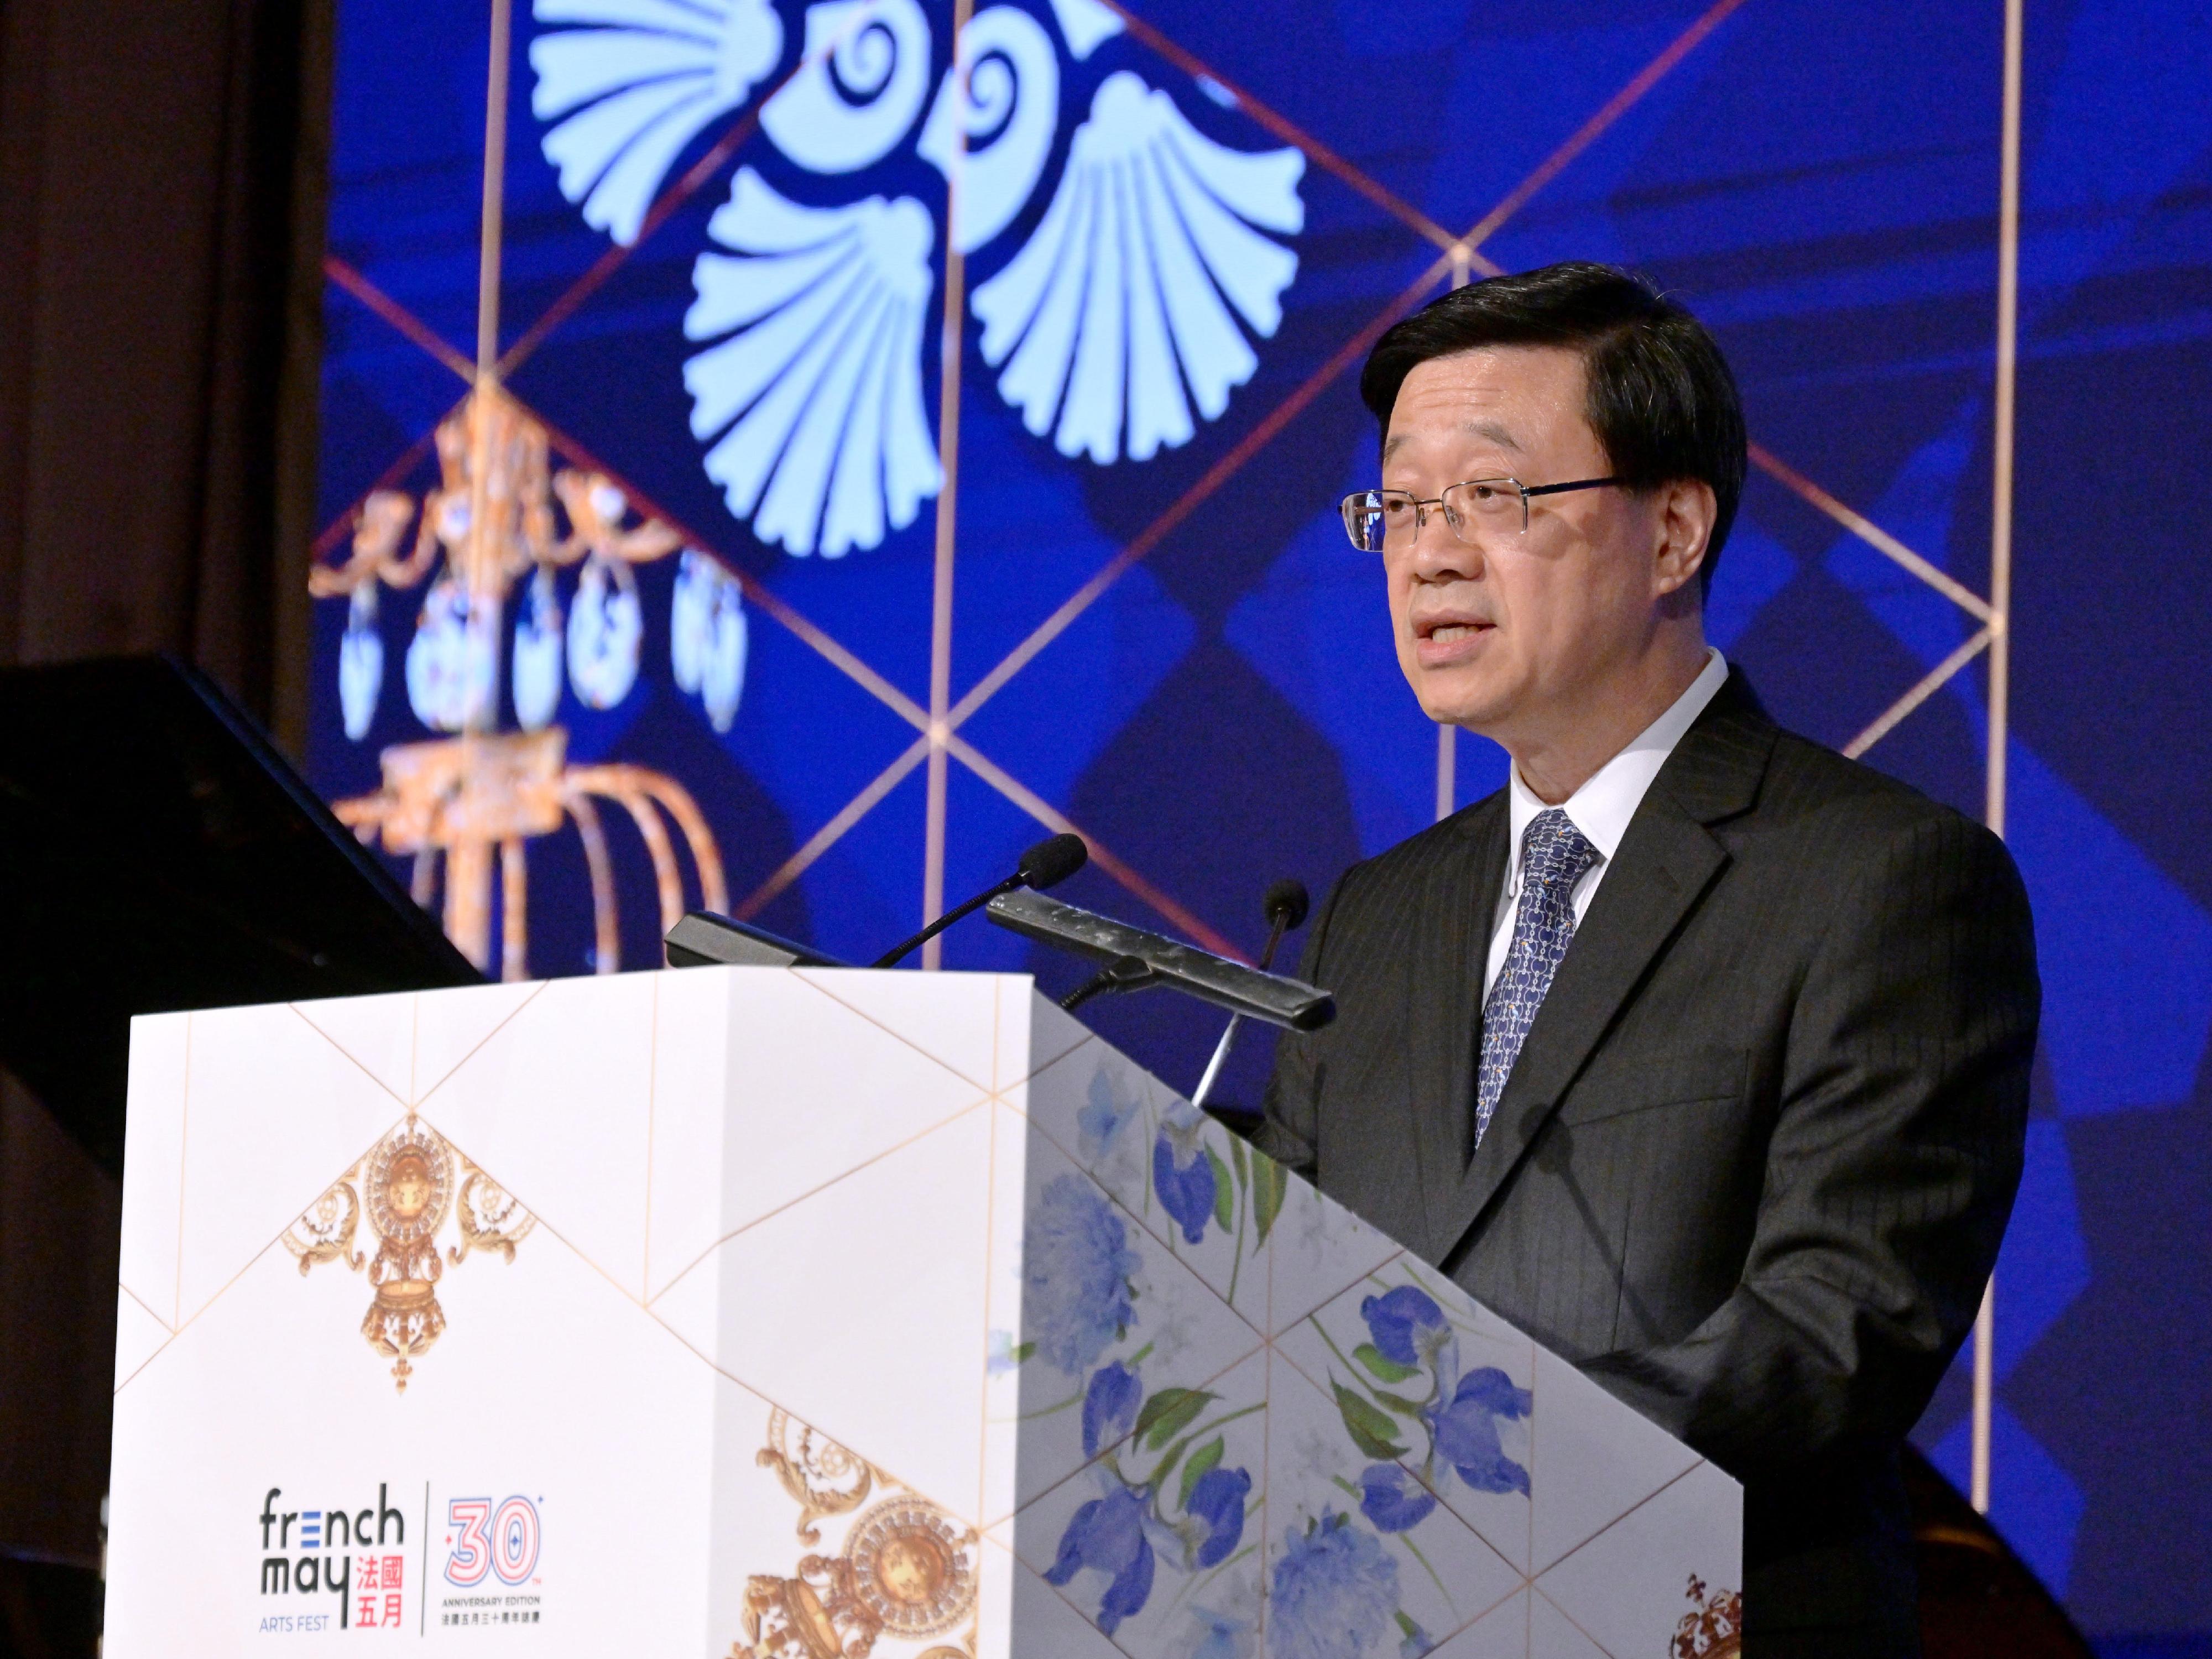 The Chief Executive, Mr John Lee, speaks at the 30th Anniversary Celebration of French May Arts Festival Gala Dinner today (May 18).